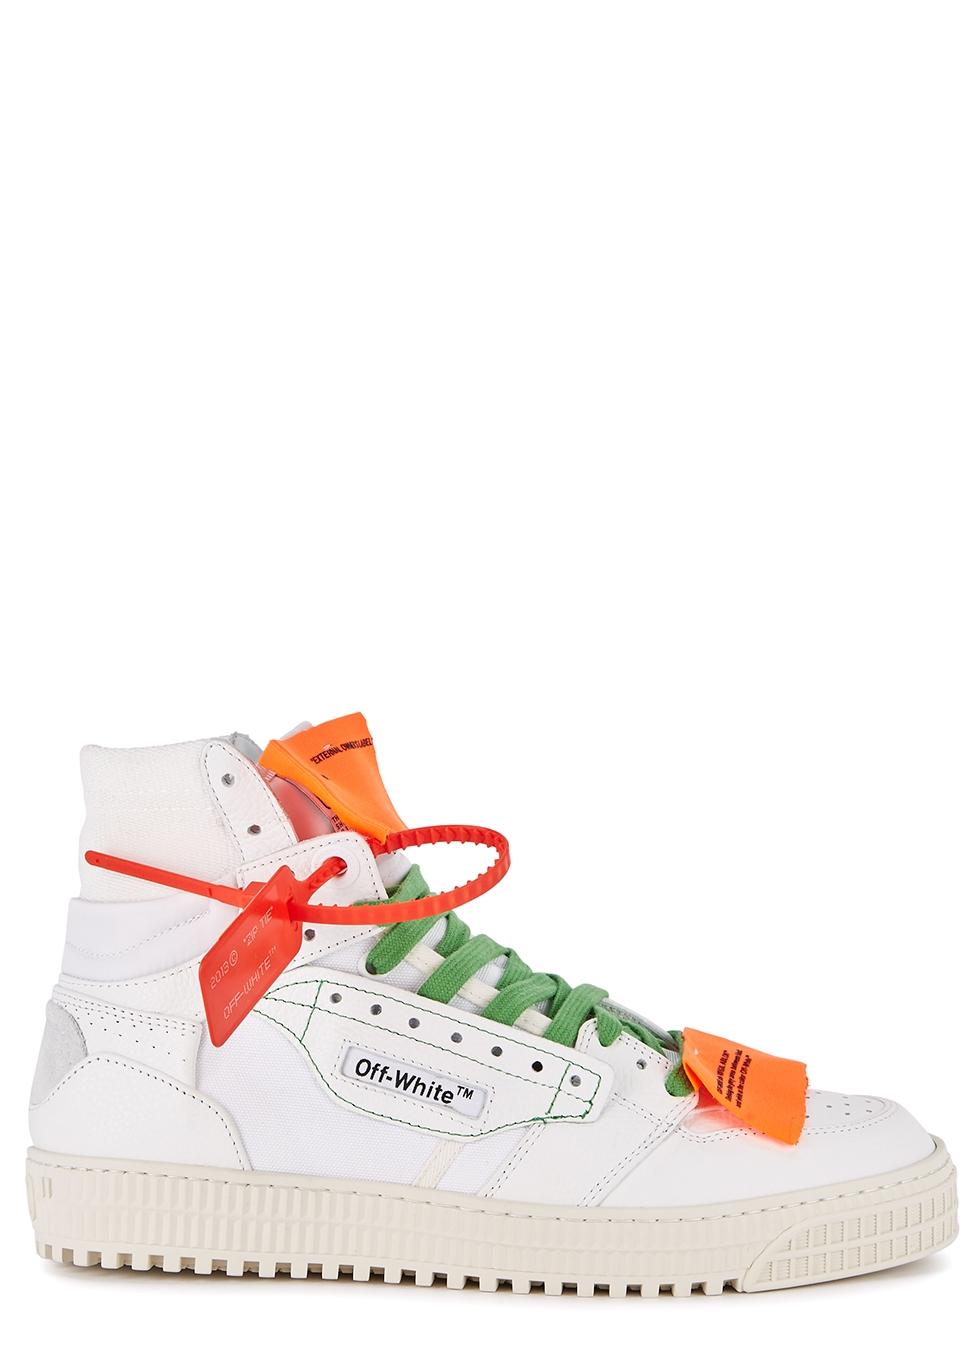 Off-White c/o Virgil Abloh Off Court 3.0 White Leather Hi-top Sneakers ...